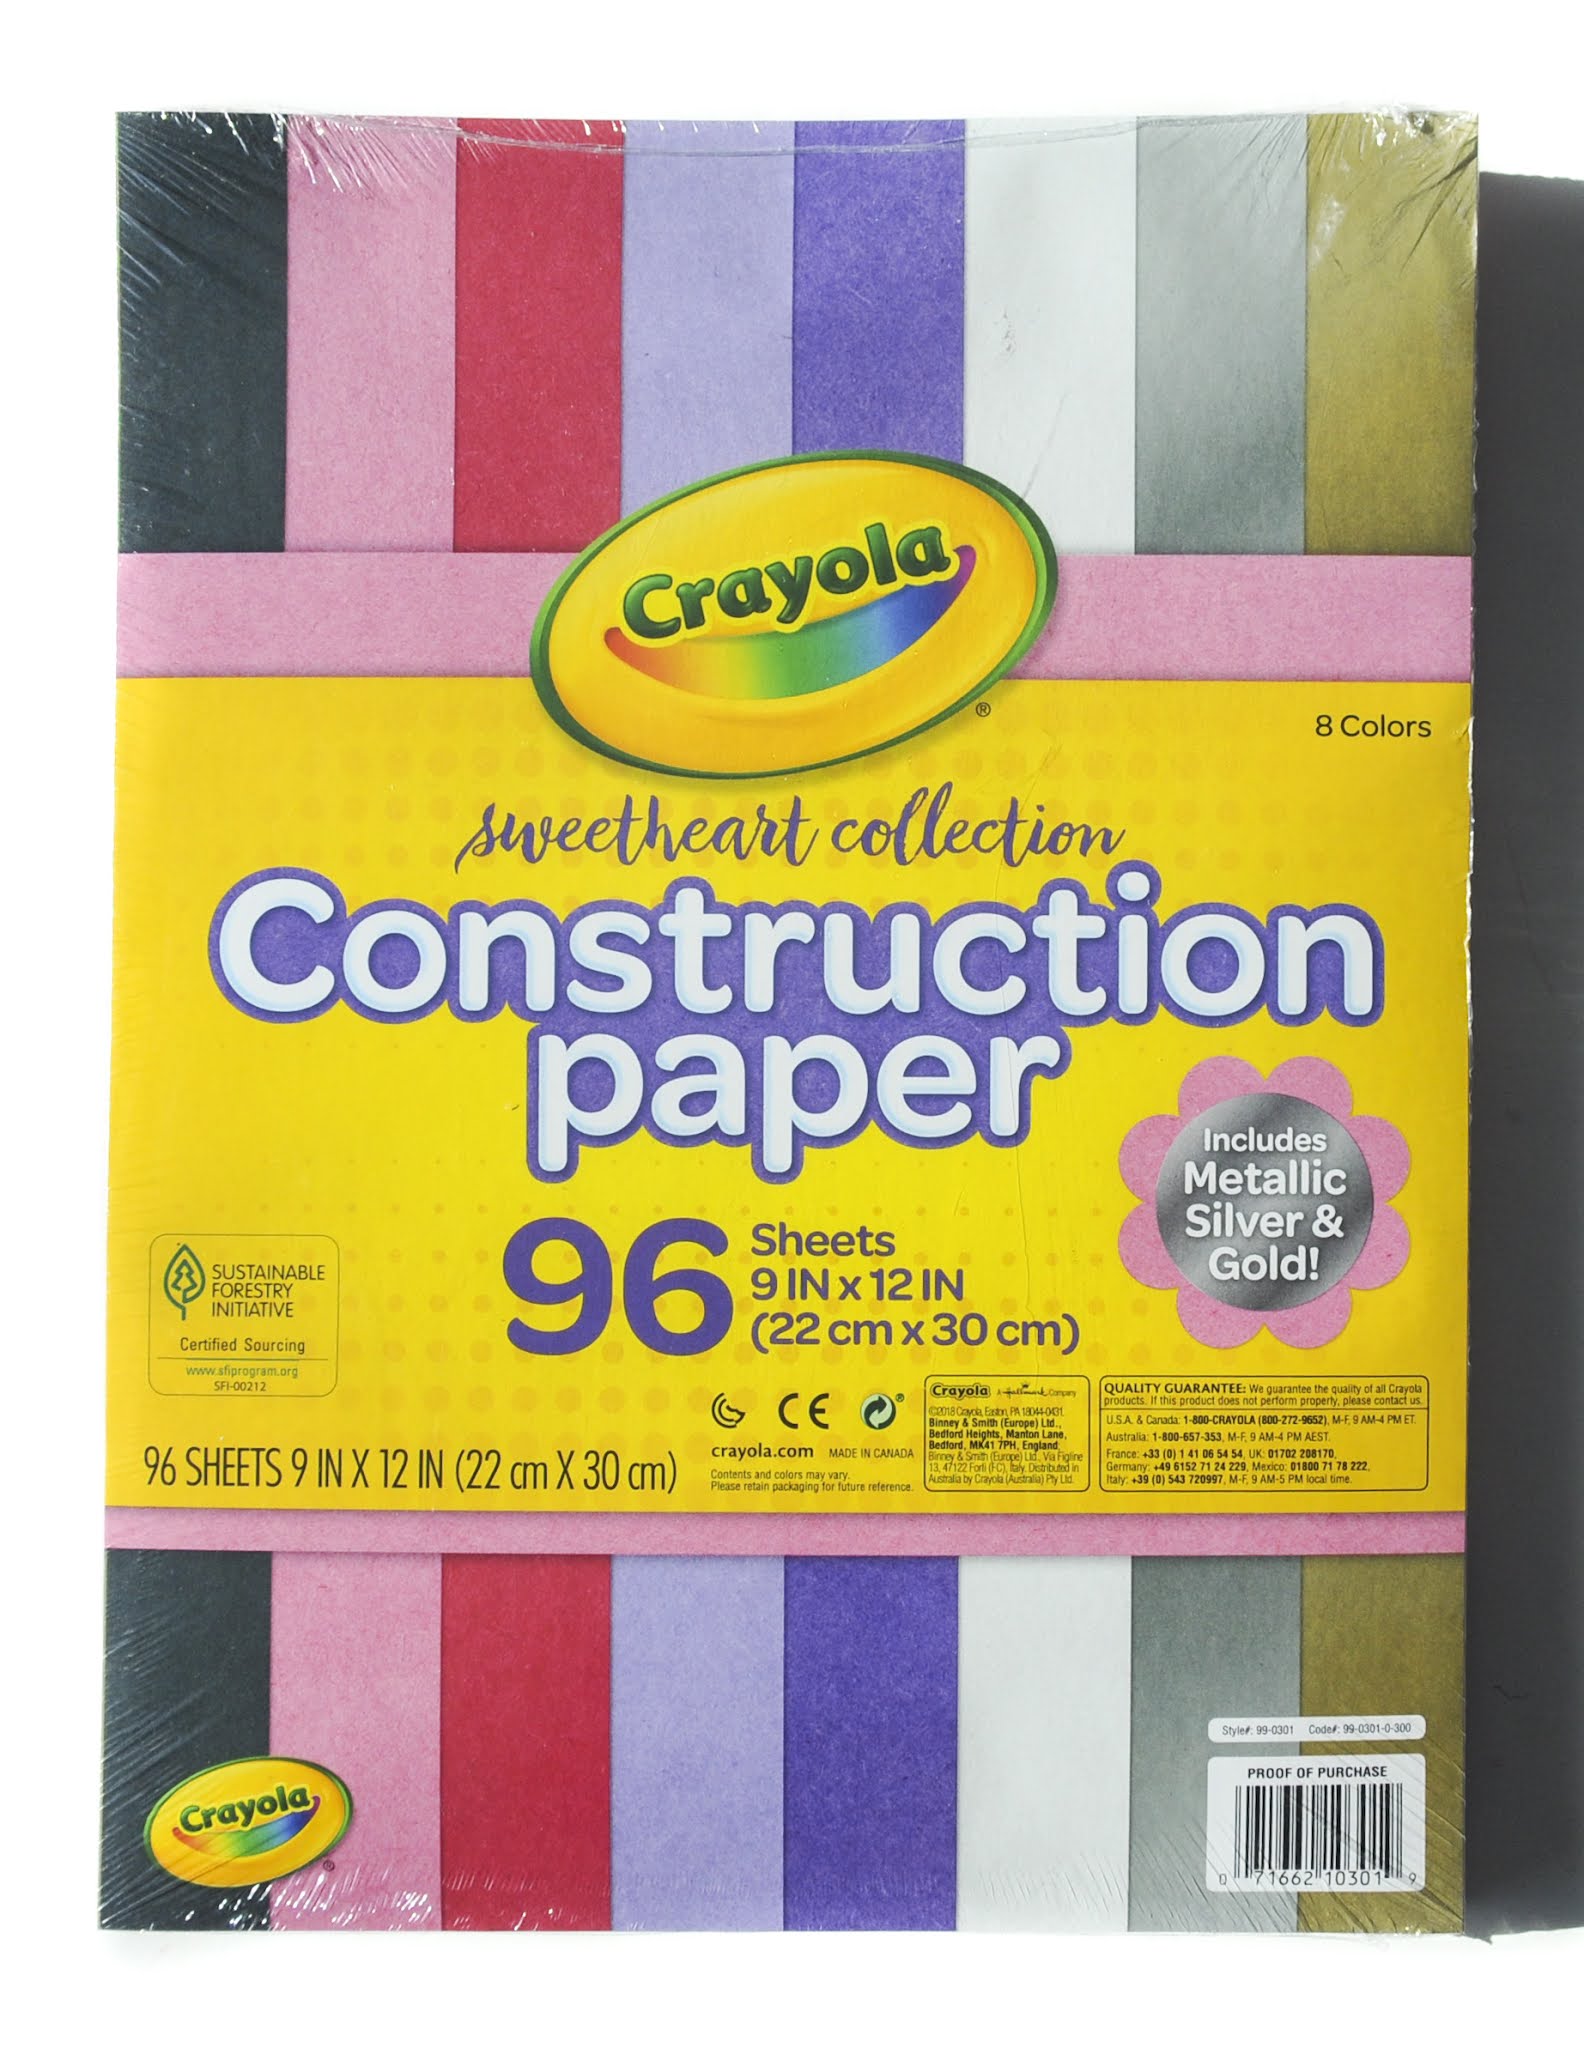 Crayola Construction Paper: What's Inside the Package